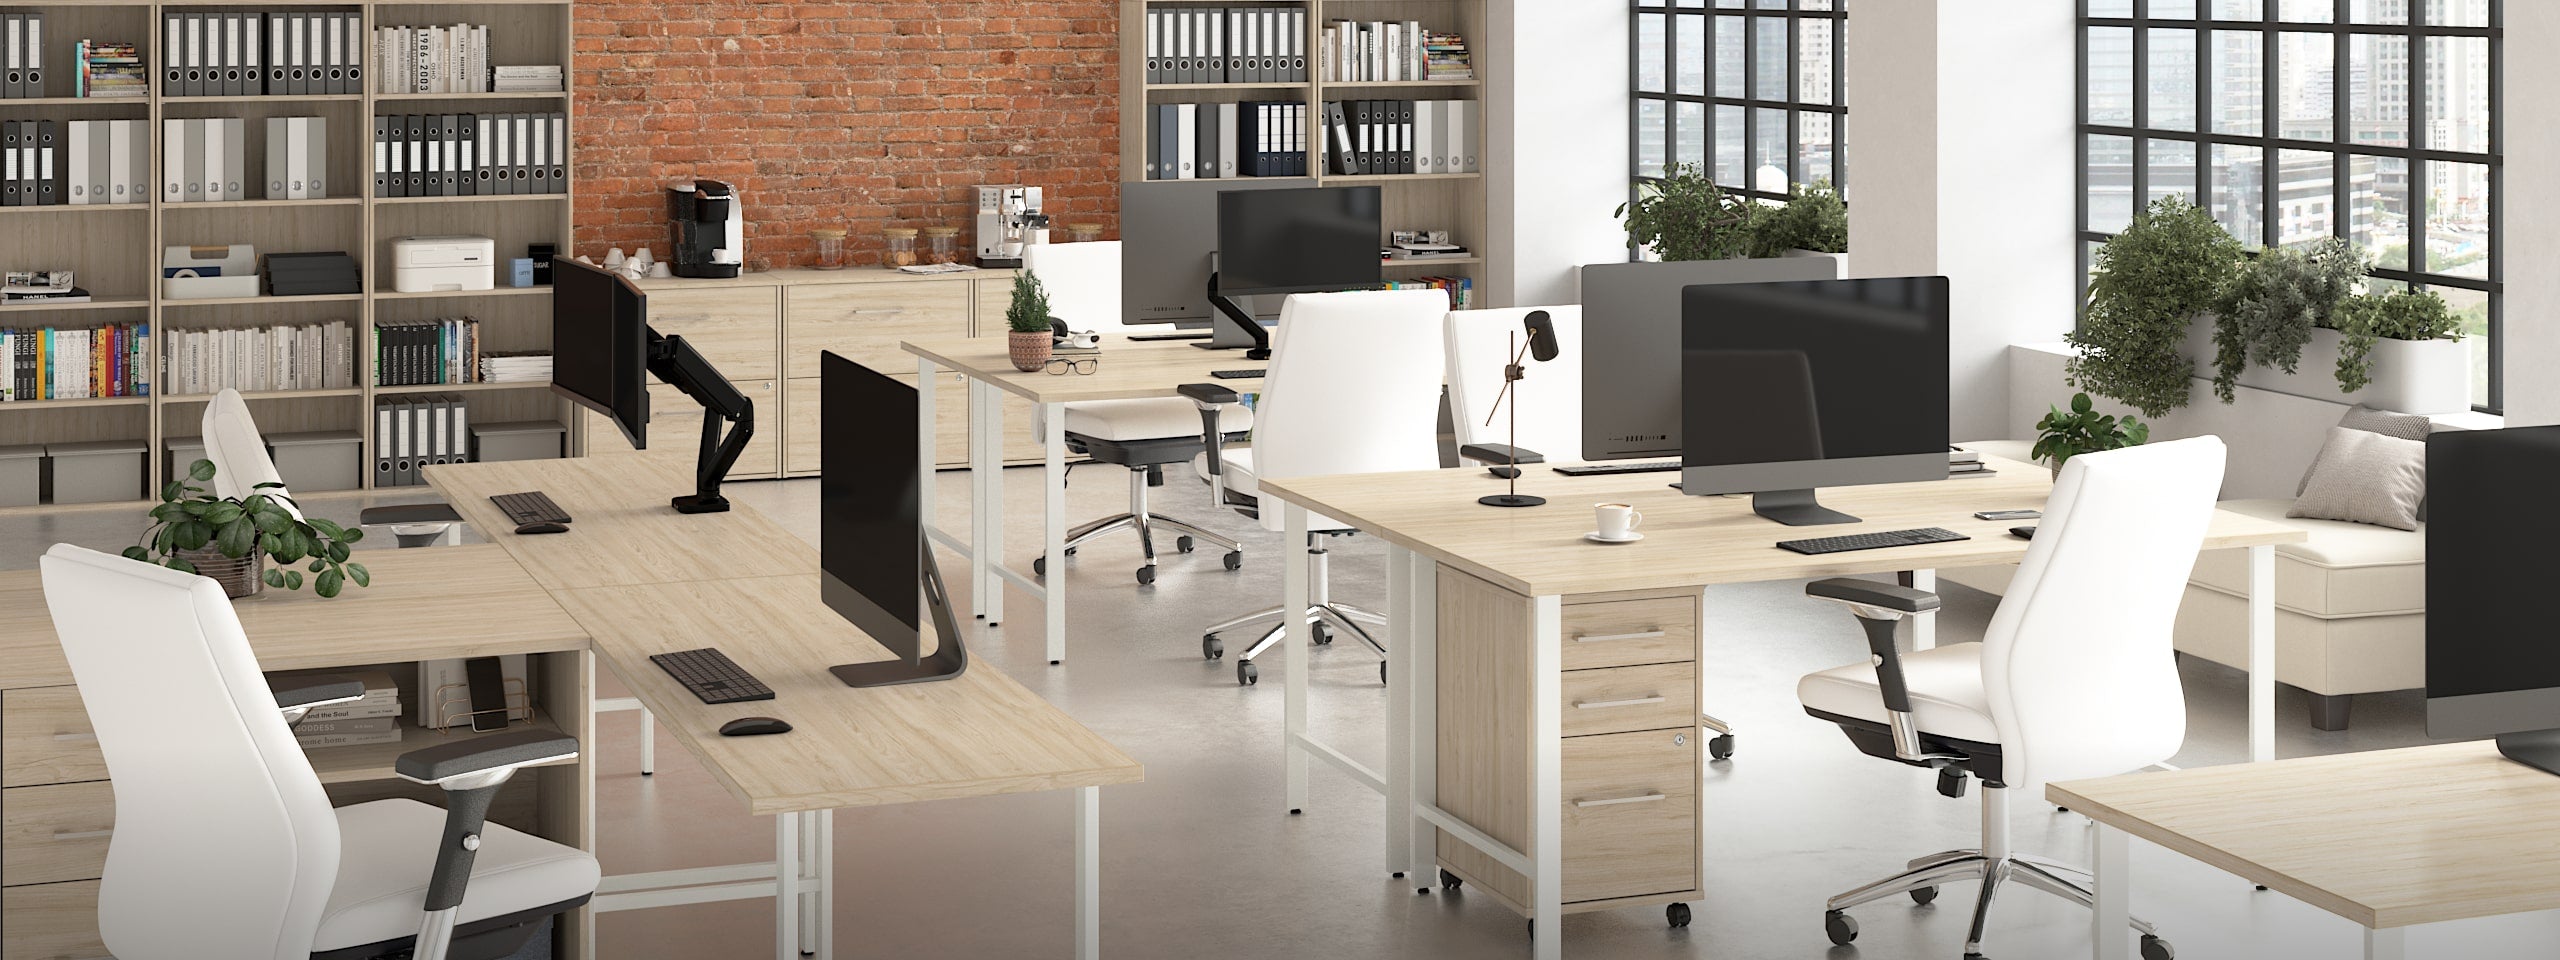 Hustle Office Furniture Collection